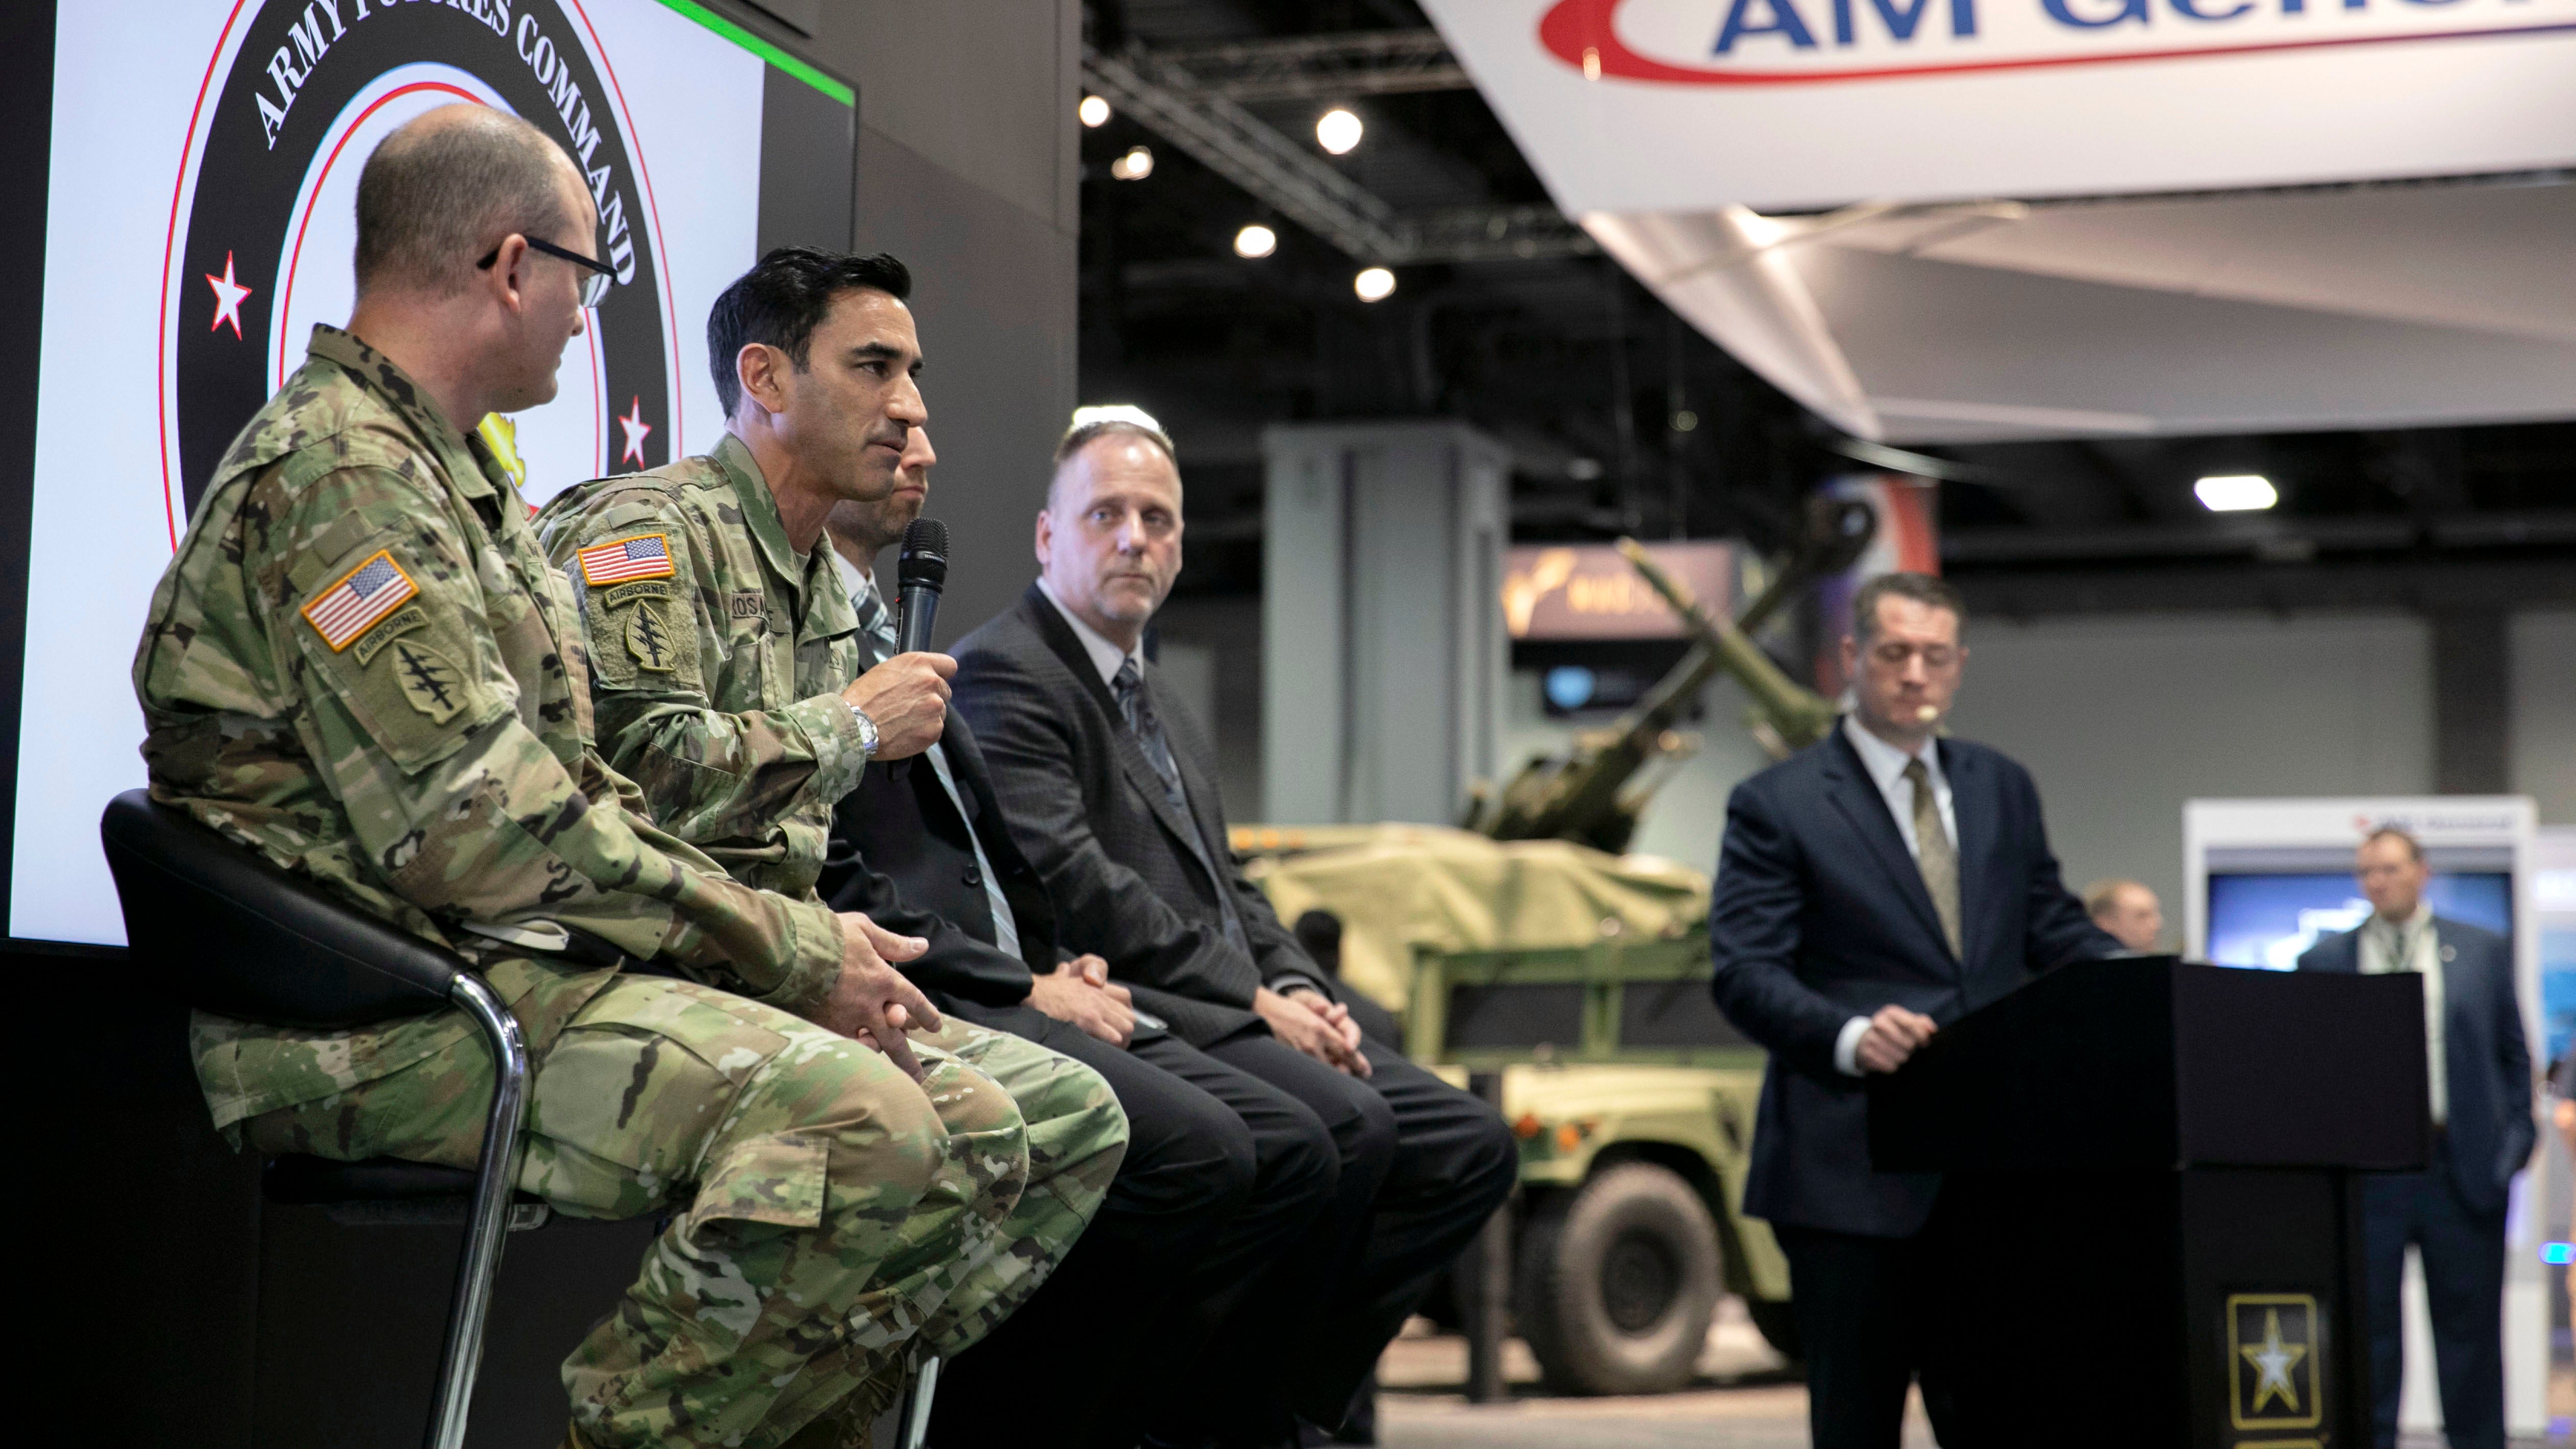 Col. Leonard Rosanoff, second from left, holding microphone, answers a question during a panel discussion at a Long-Range Precision Fires workshop at the 2019 AUSA Annual Meeting and Exposition at the Washington Convention Center on Oct. 14, 2019. 